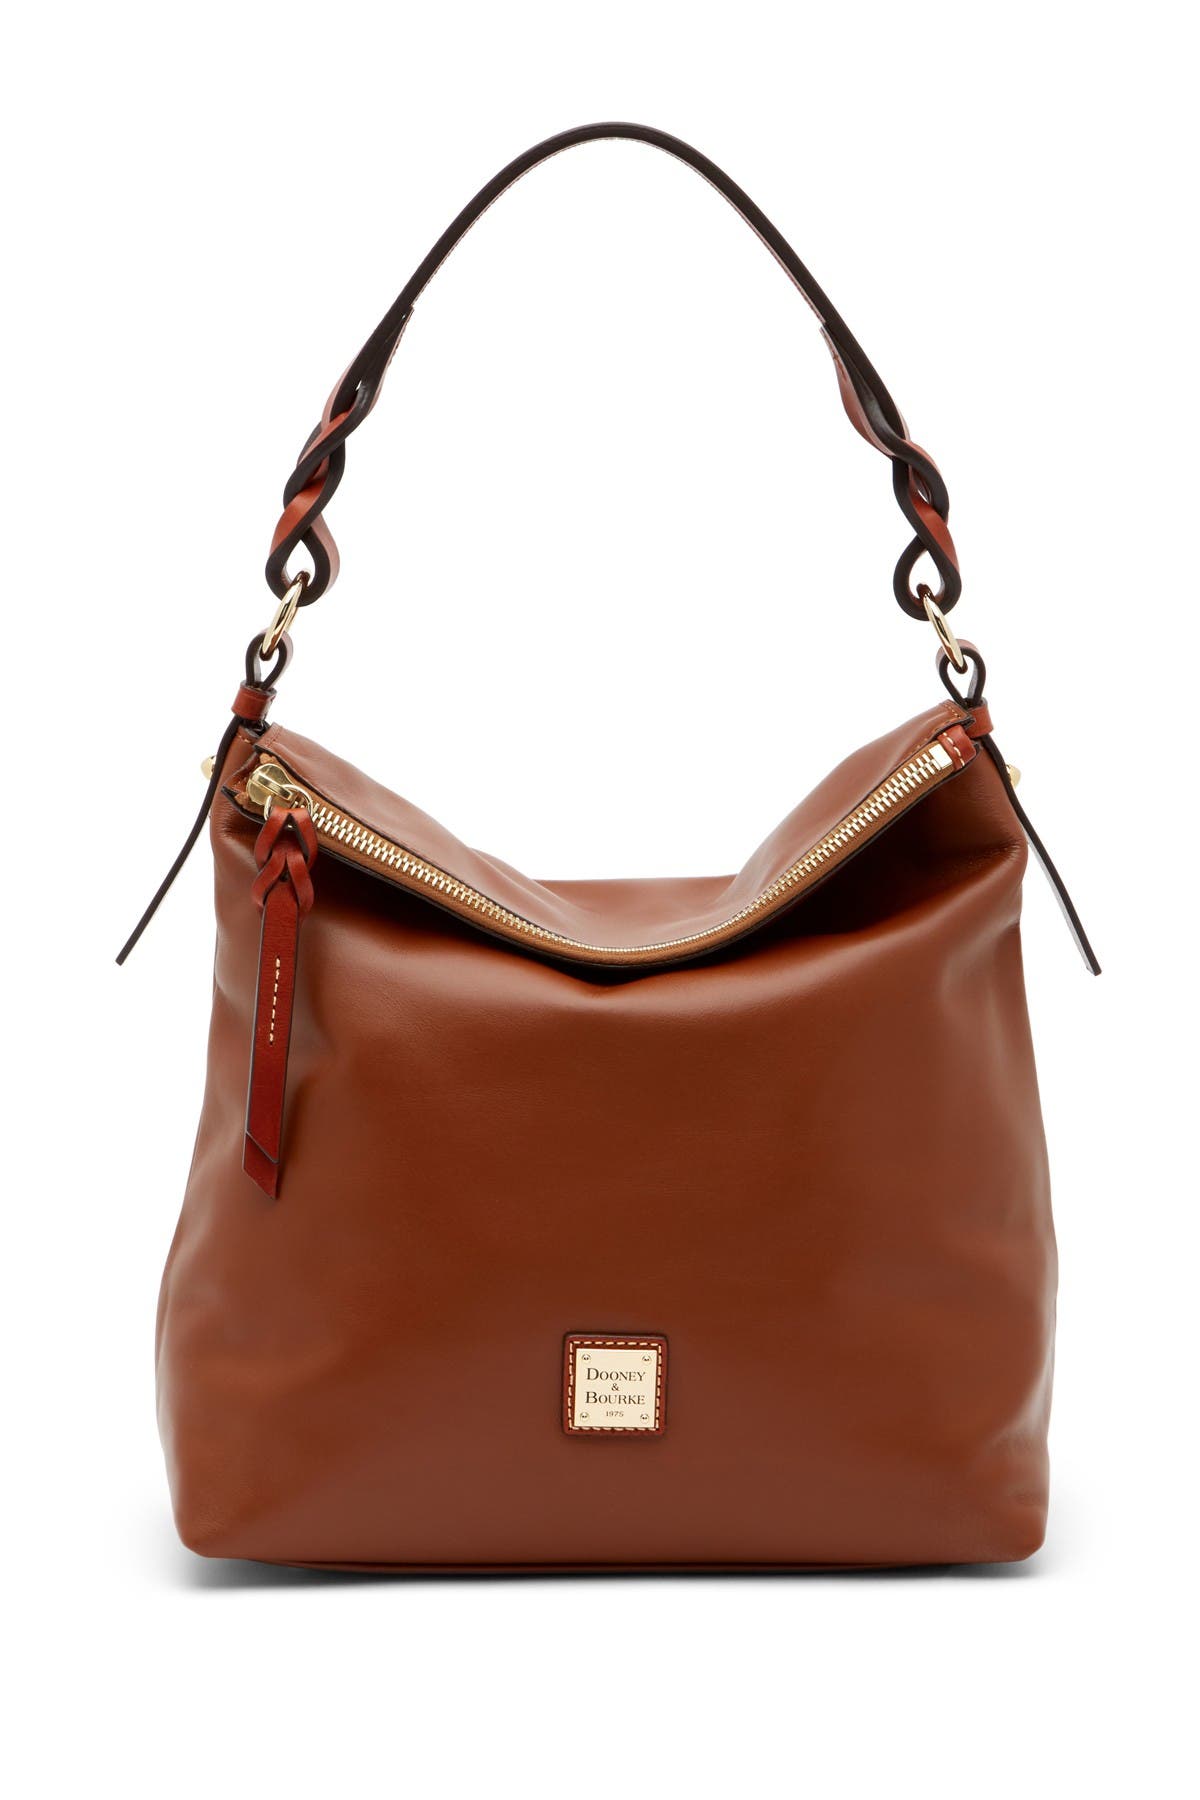 dooney and bourke small sloan